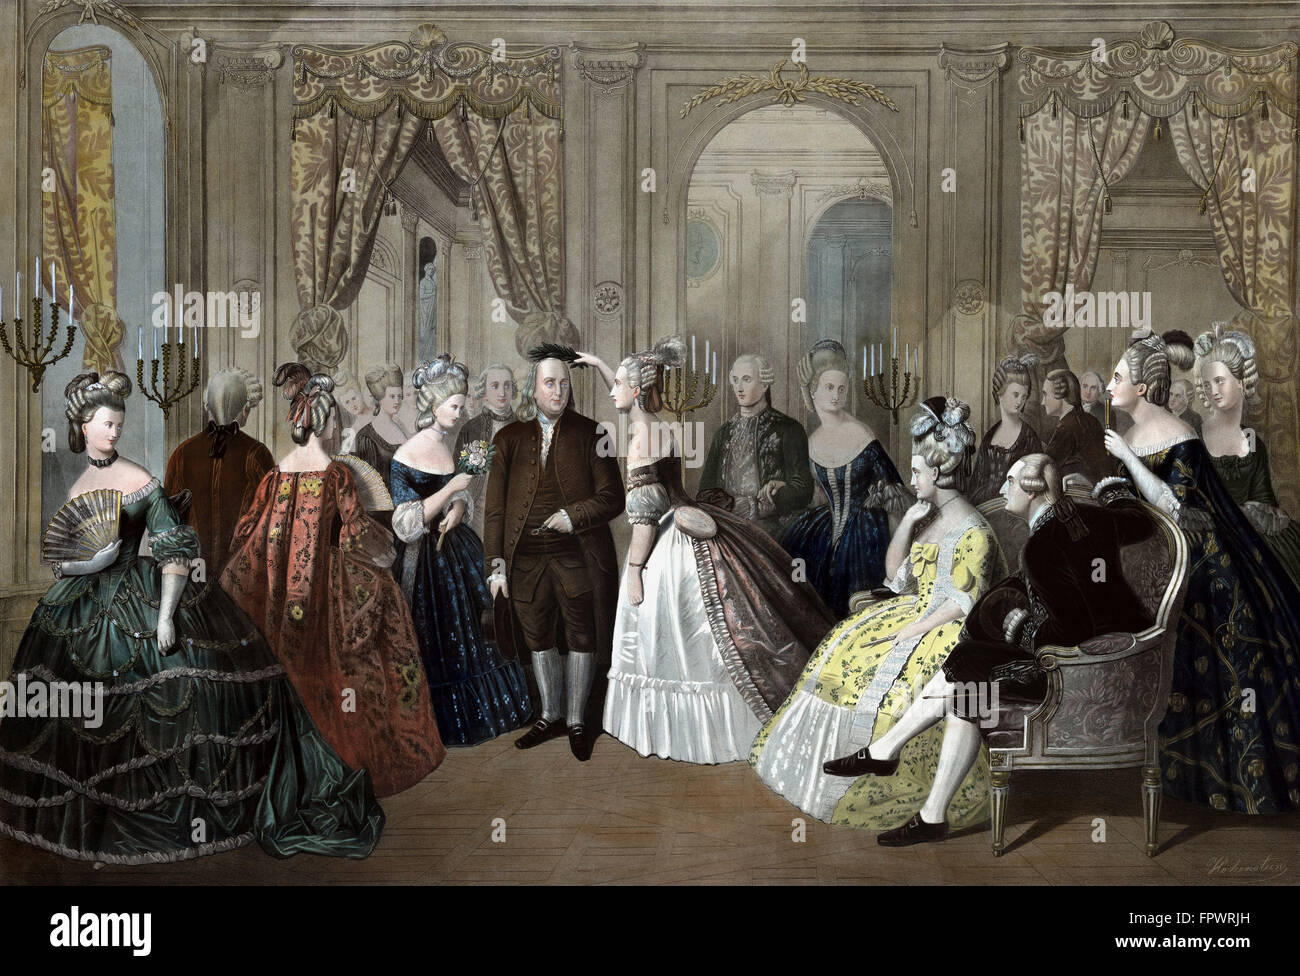 Vintage American History print of Benjamin Franklin's reception by the French court. Stock Photo